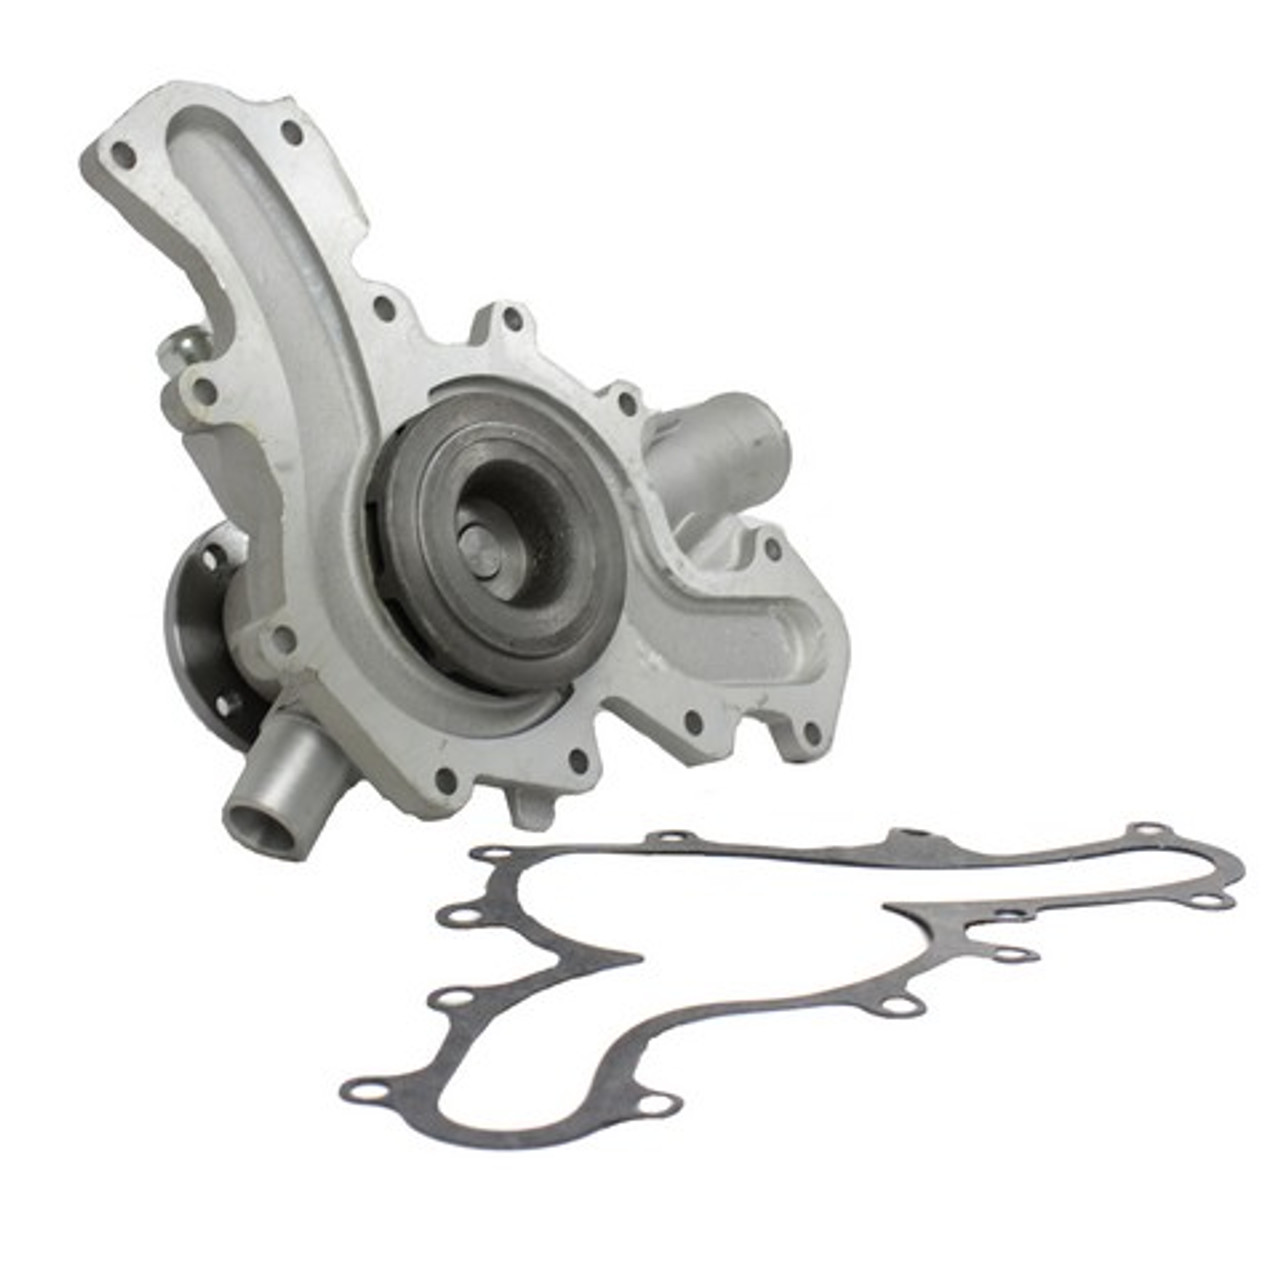 Water Pump 4.0L 2008 Ford Mustang - WP4028.26